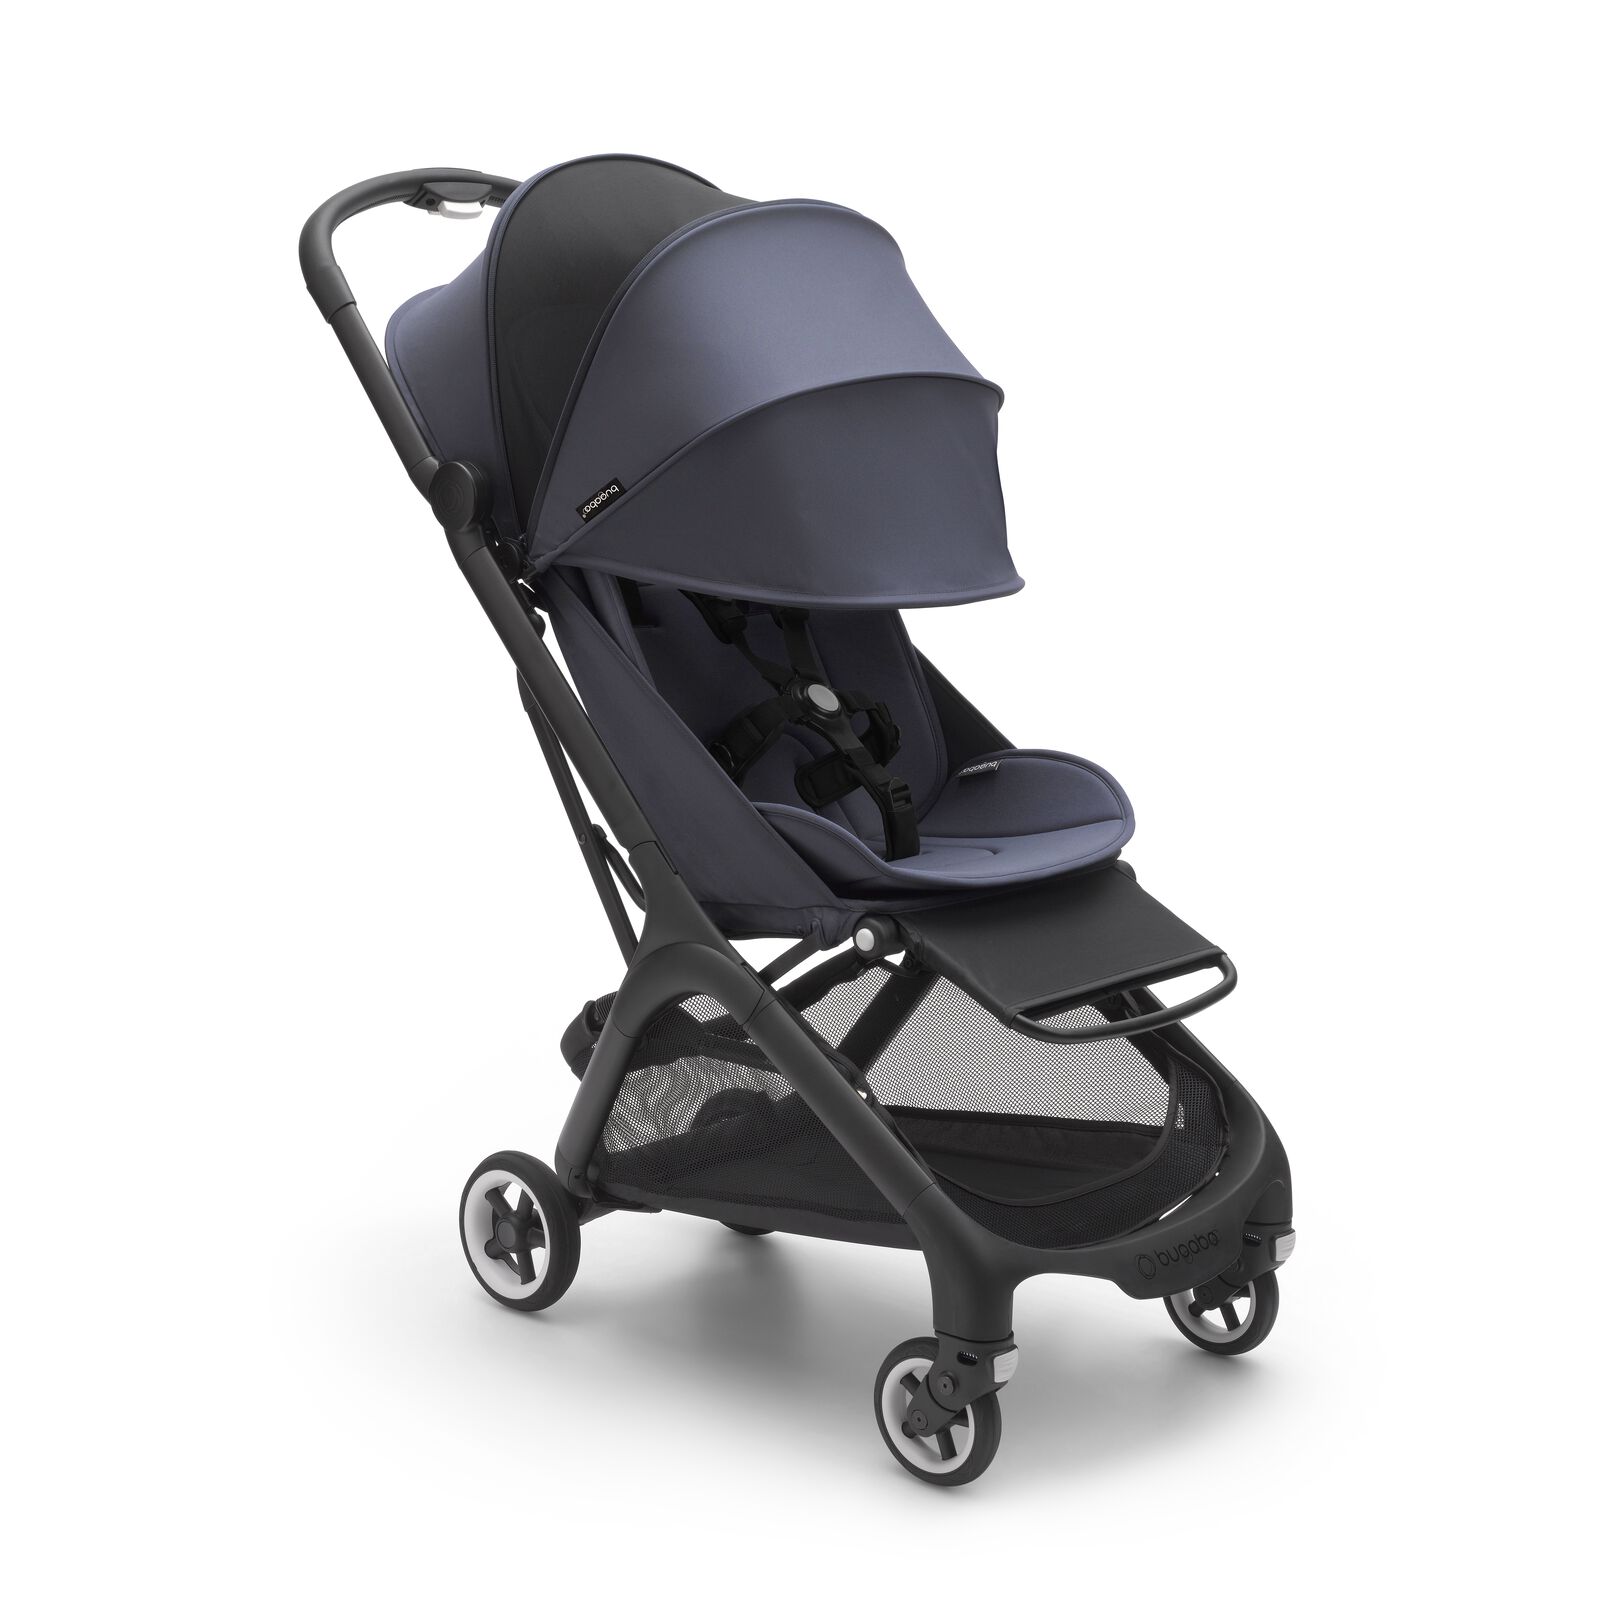 Bugaboo Butterfly seat pram - View 8